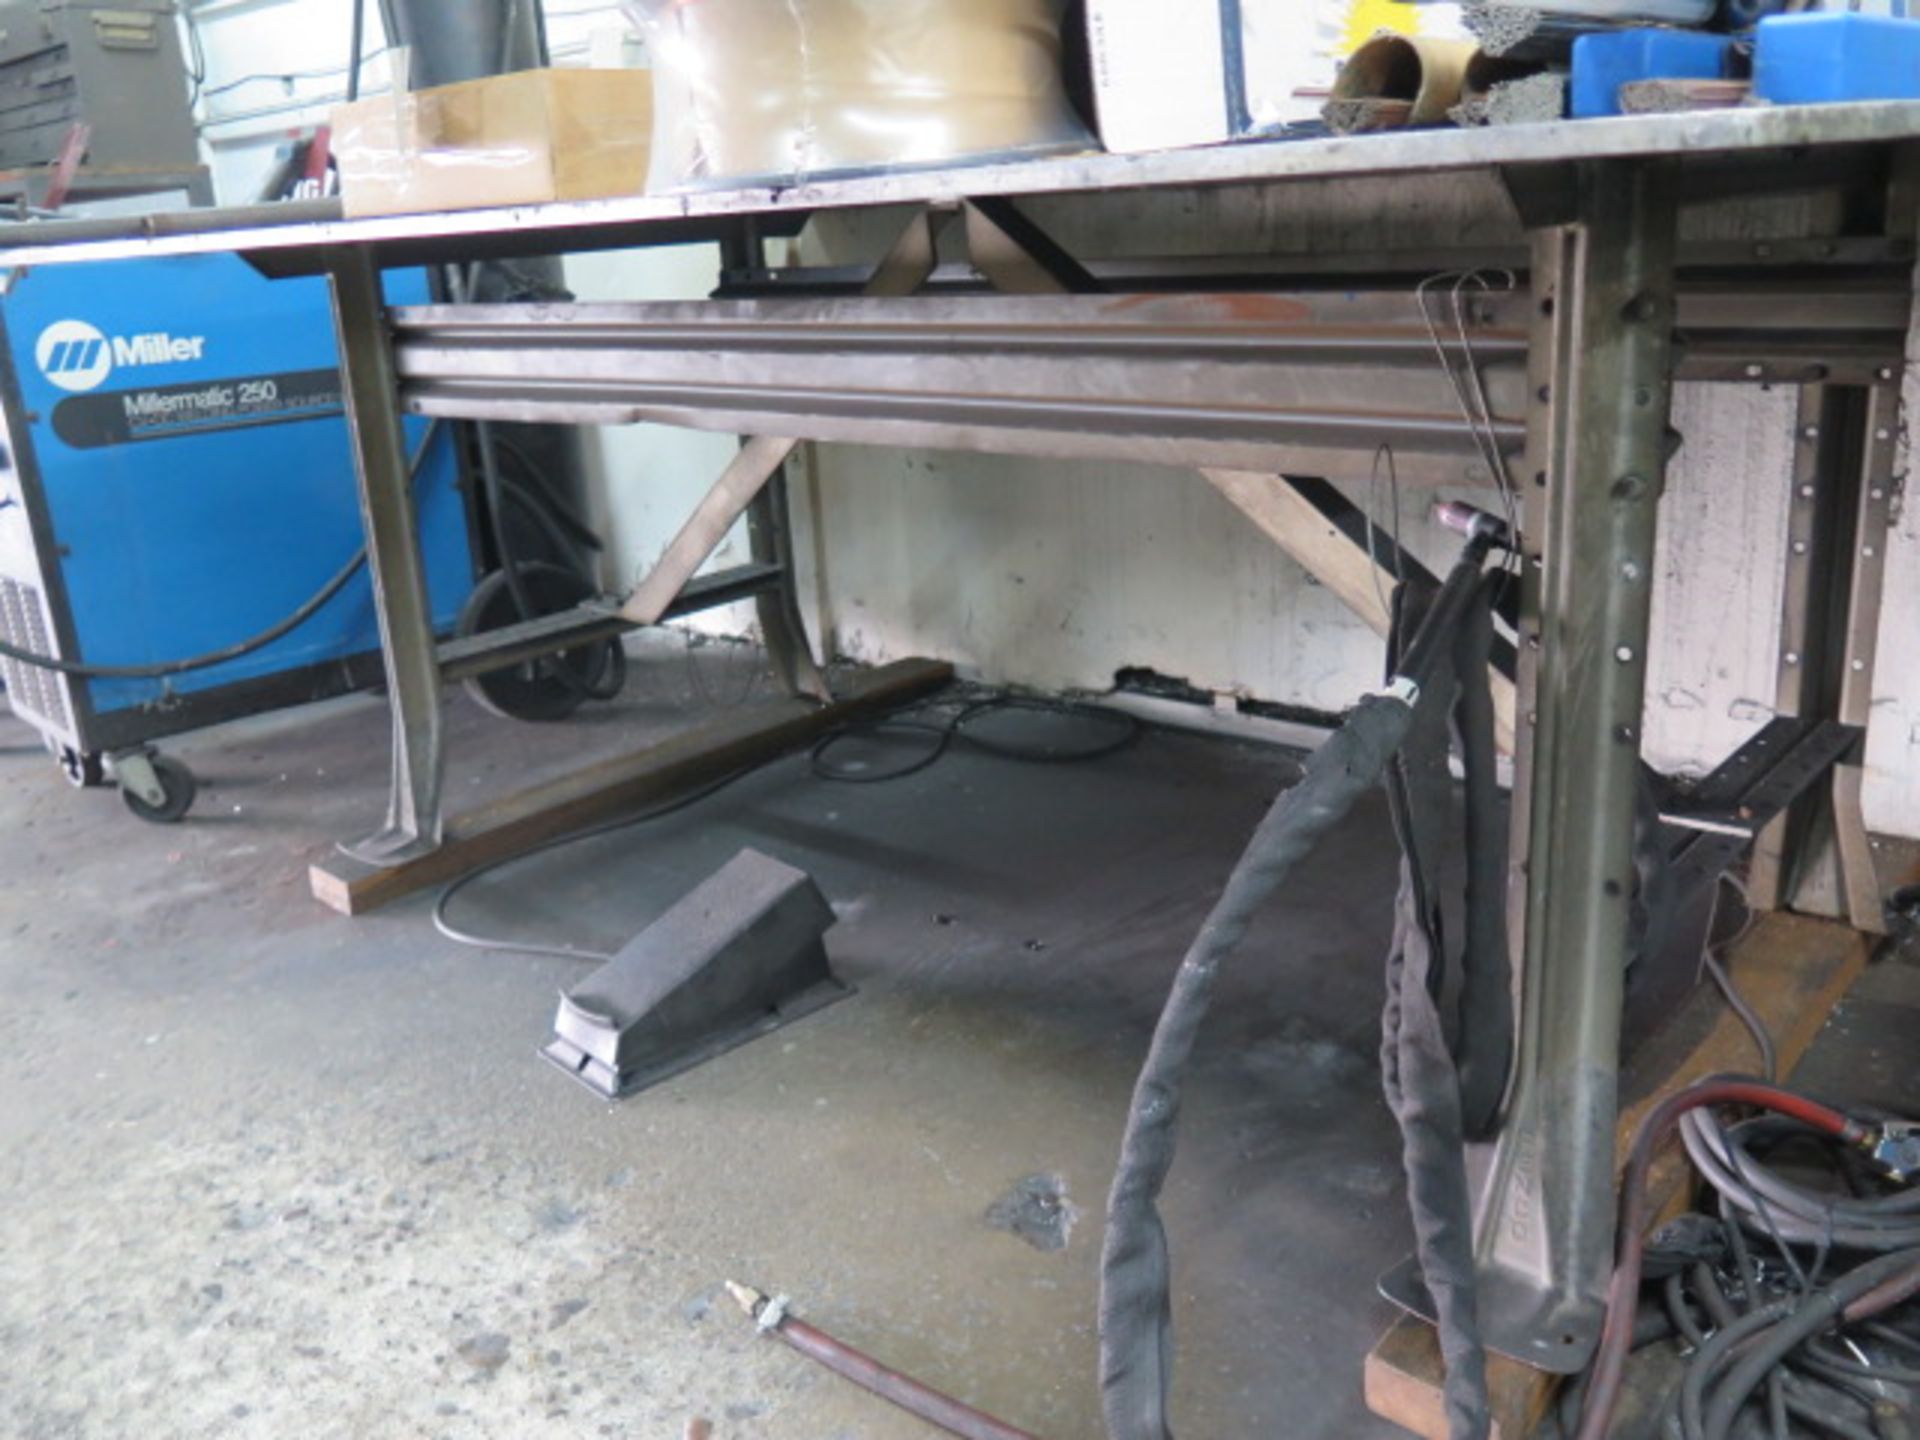 Aluminum Top Welding Table (SOLD AS-IS - NO WARRANTY) - Image 3 of 4